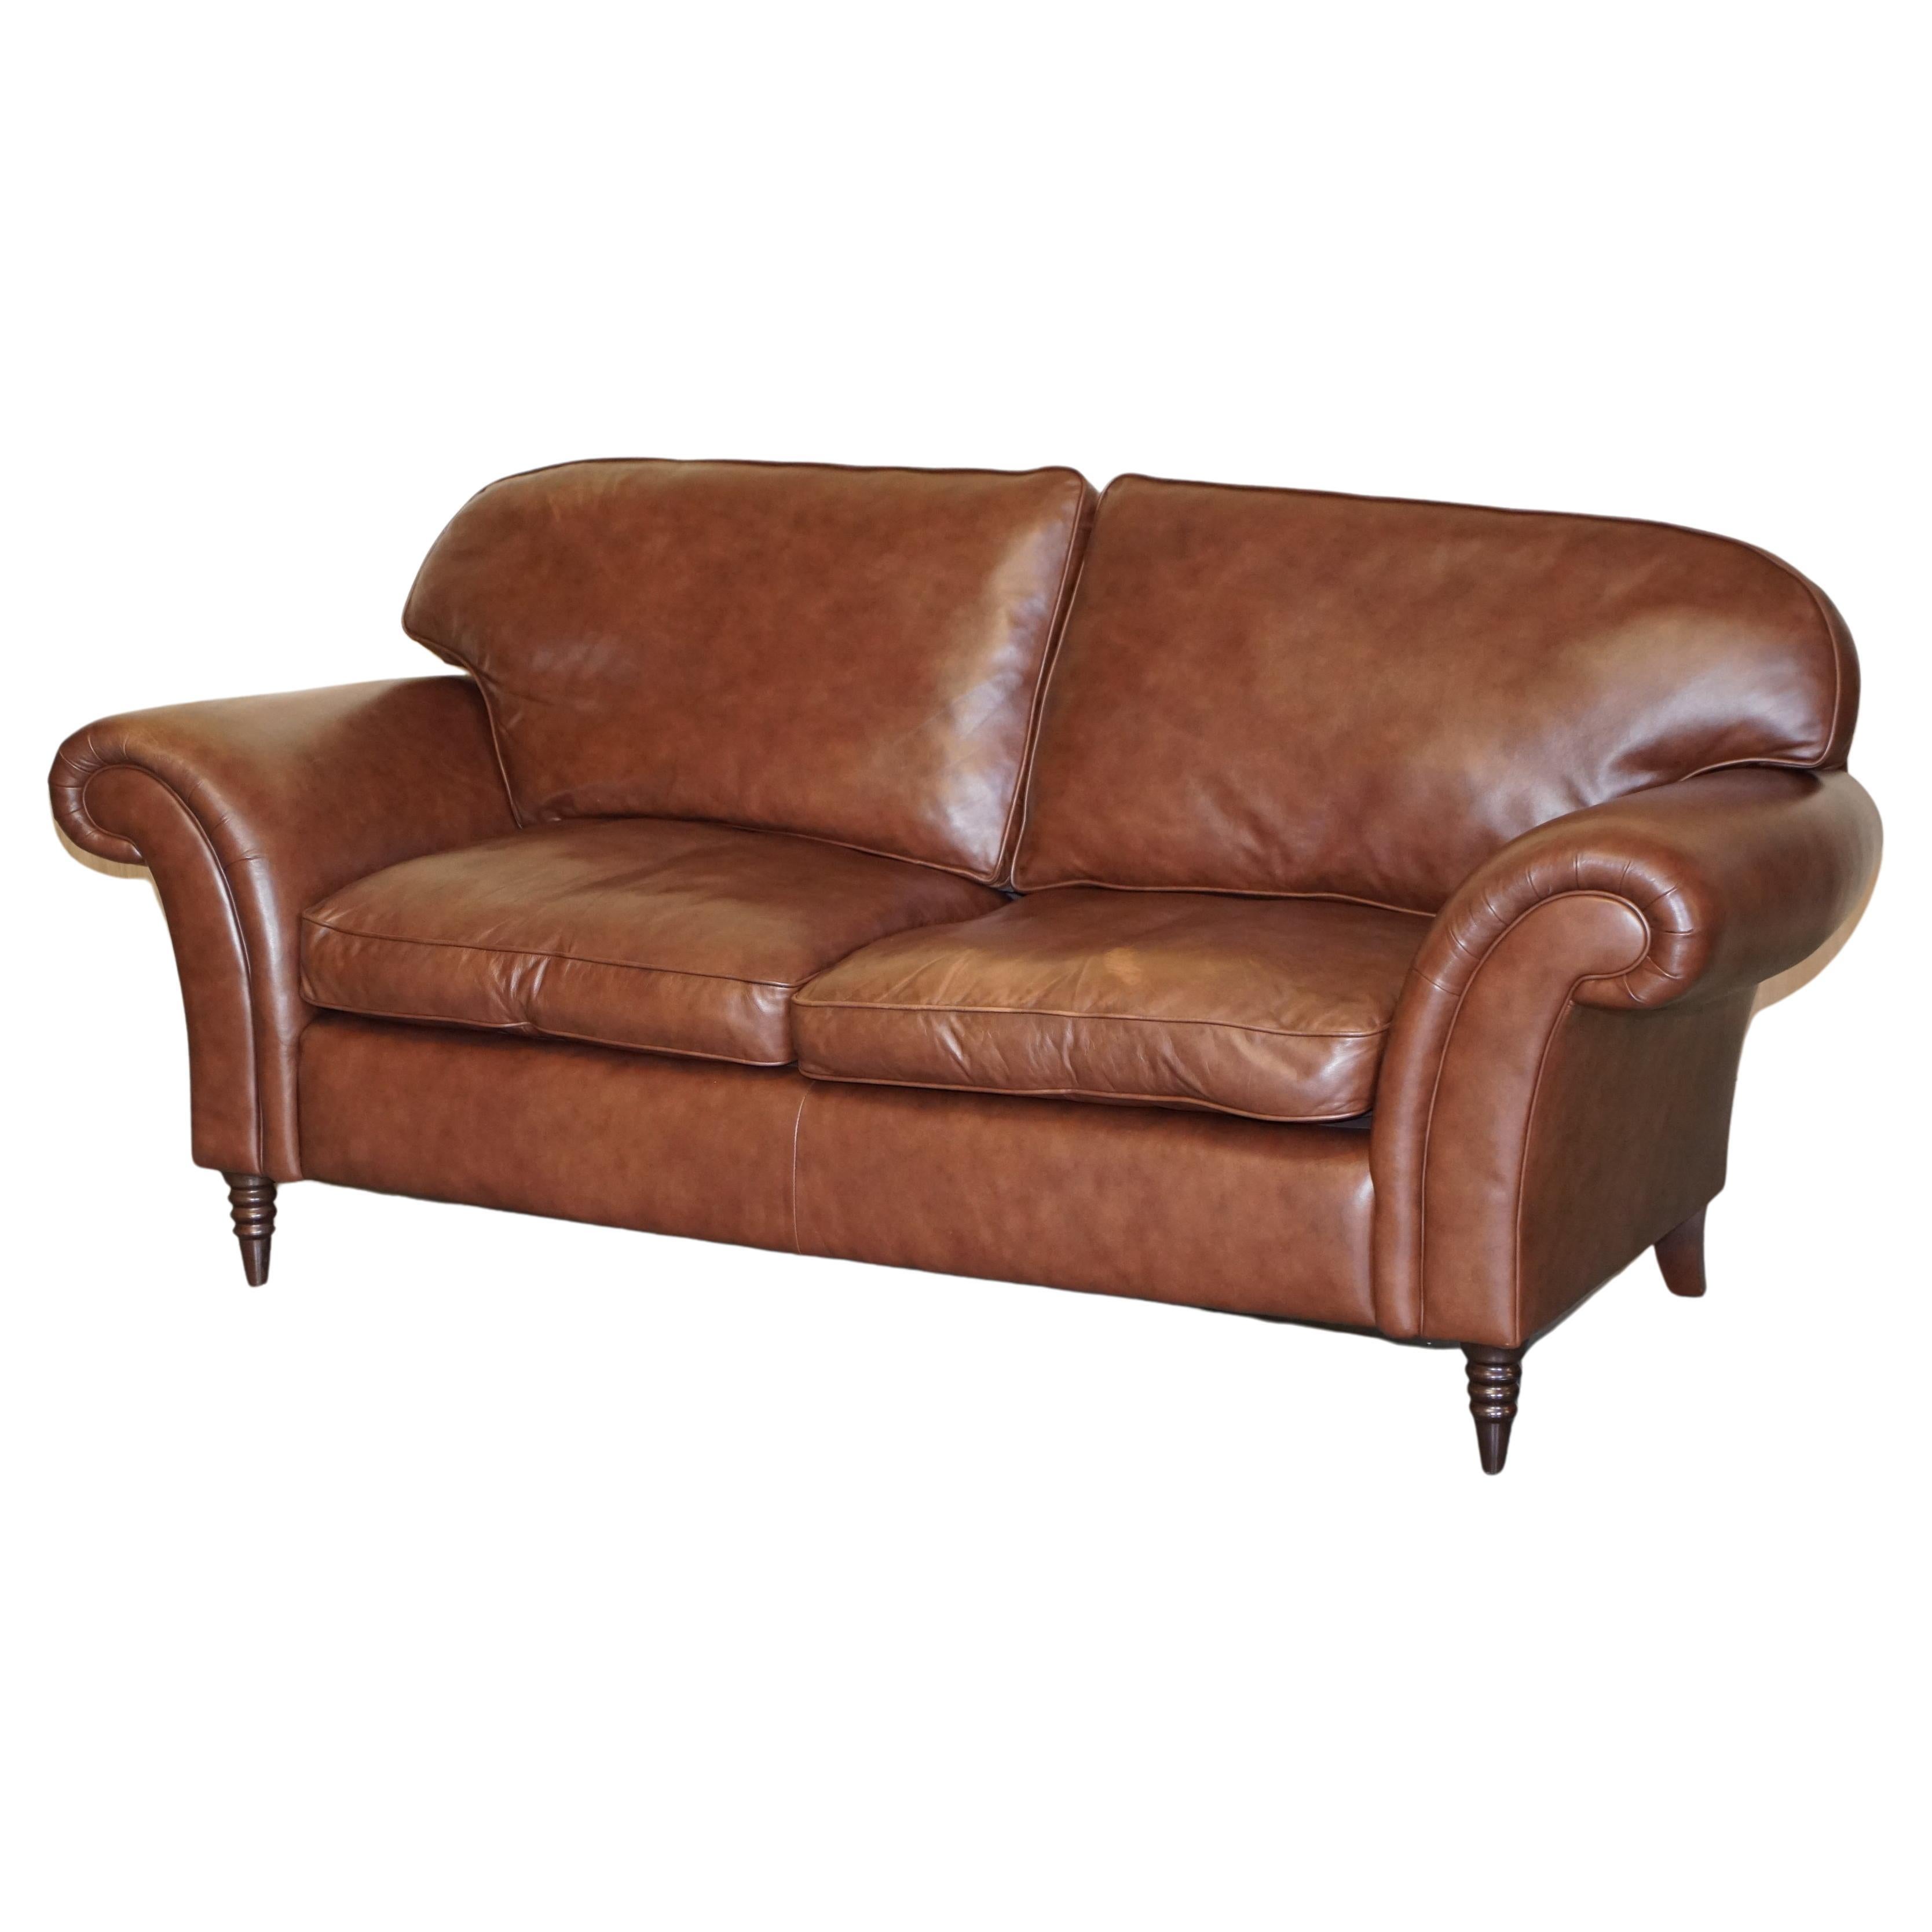 knijpen Sneeuwstorm Gewoon Stunning 1 of 2 Very Large Heritage Brown Leather Laura Ashley Mortimer  Sofas For Sale at 1stDibs | laura ashley leather sofas, laura ashley sofas, laura  ashley leather armchair